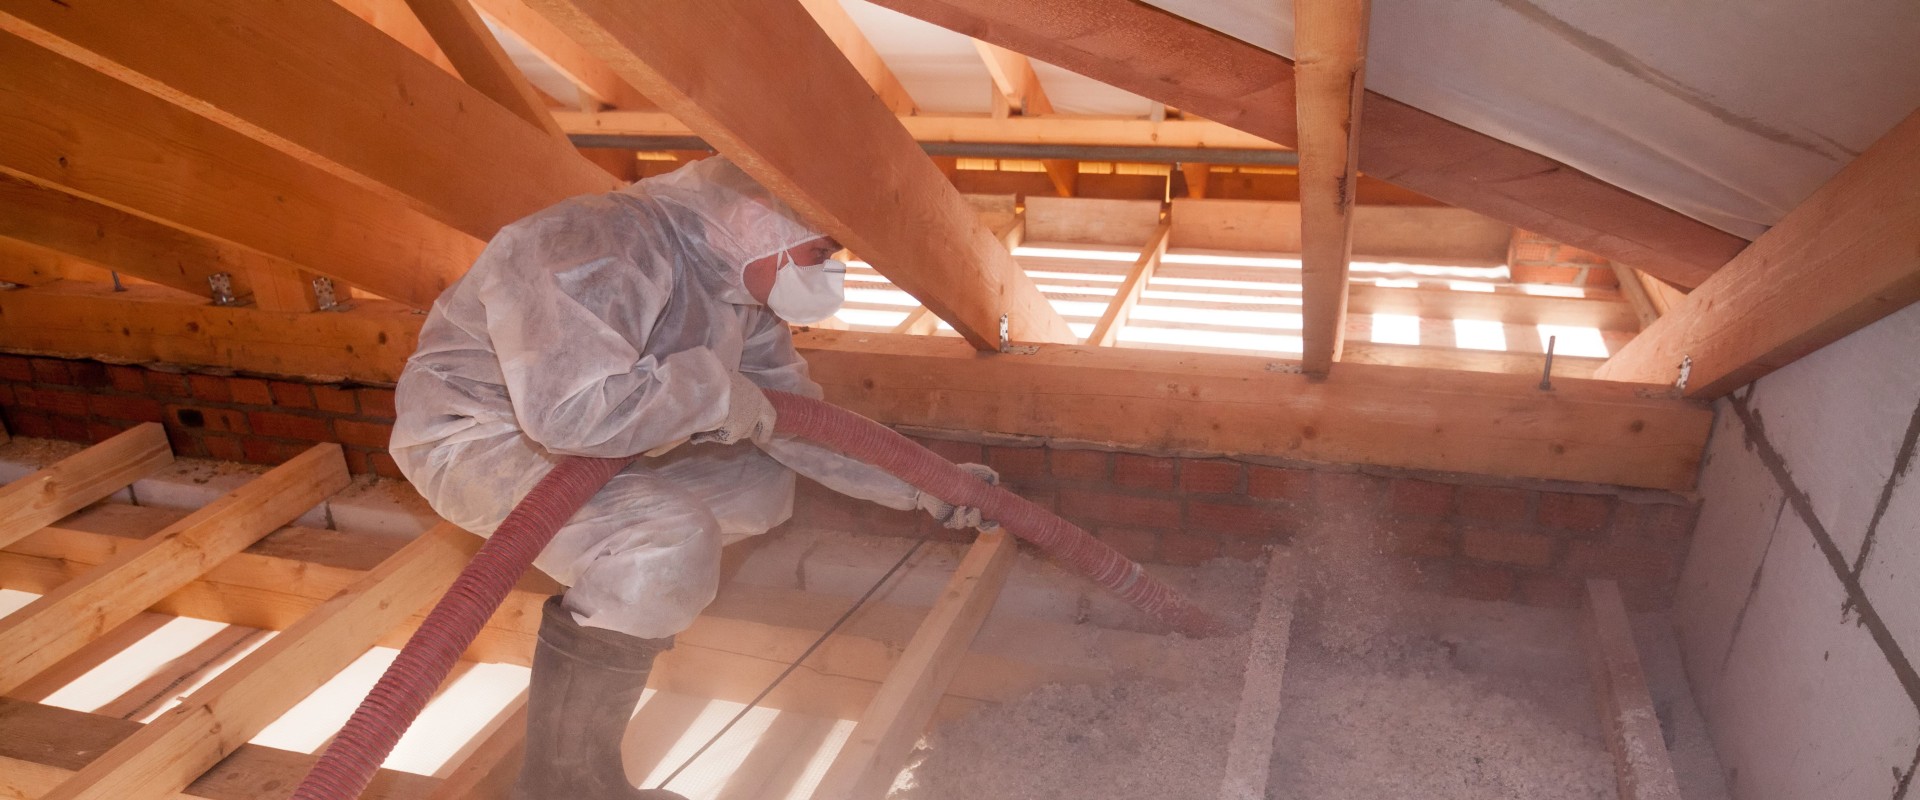 Can I Install Attic Insulation Myself and Get Rebates or Incentives in Boca Raton, FL?